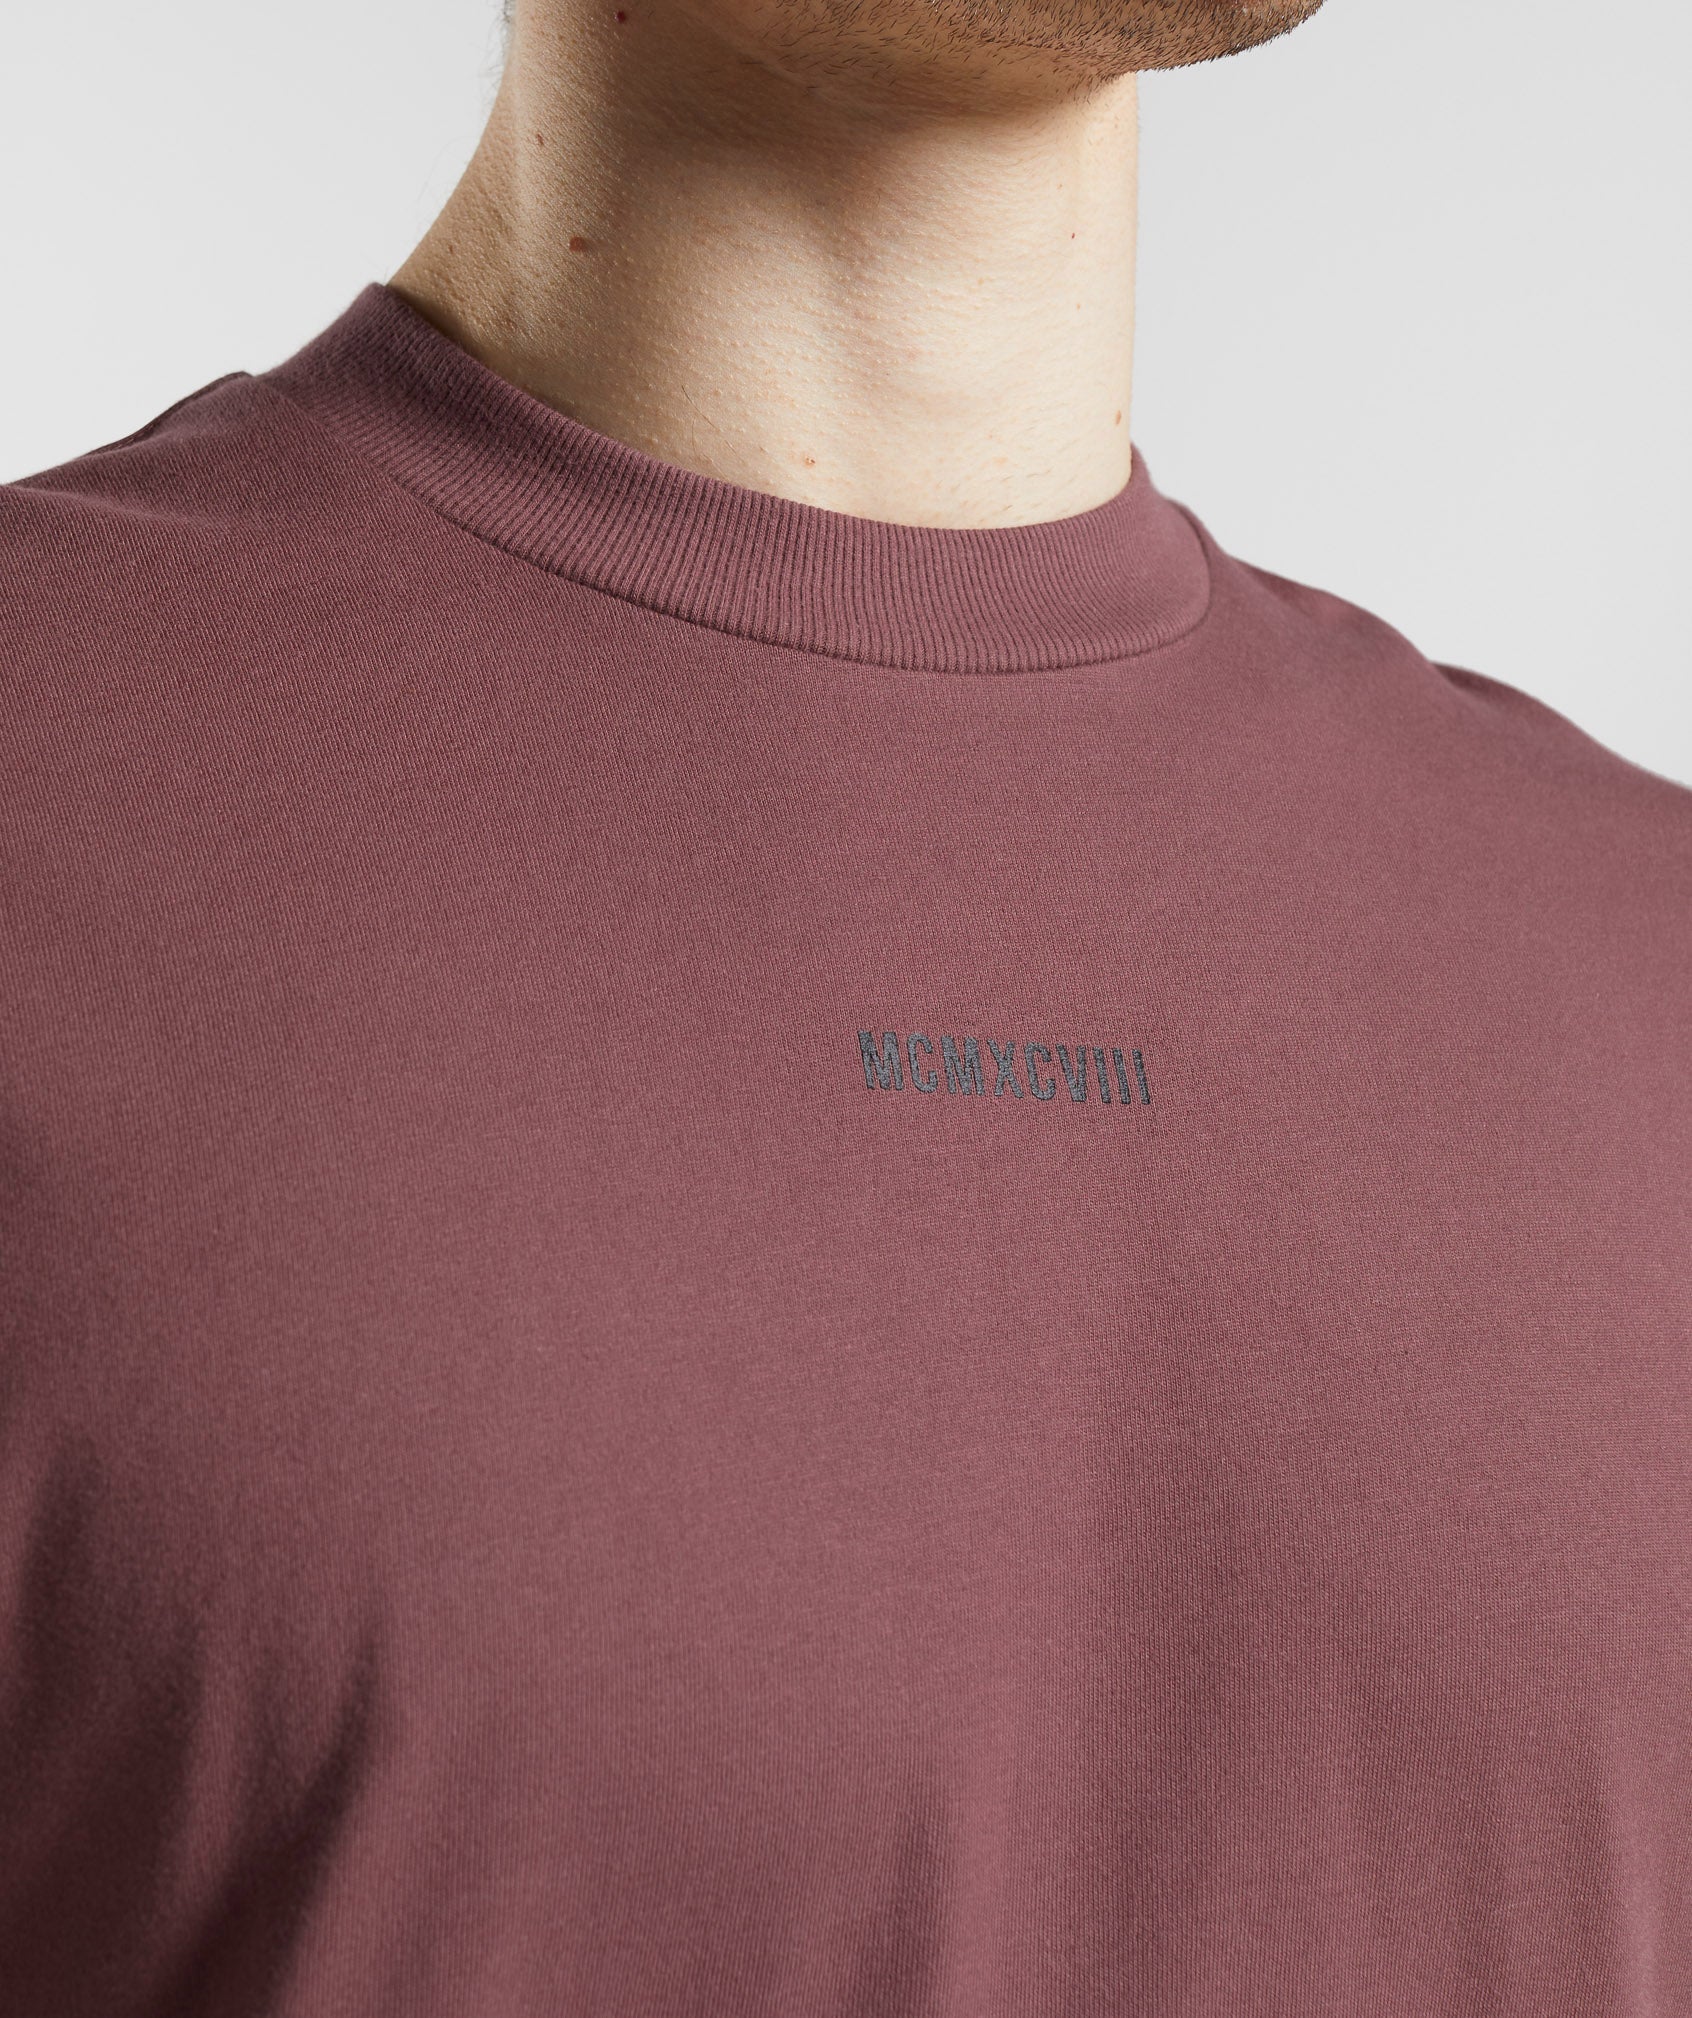 GS x David Laid Oversized Long Sleeve T-Shirt in Magenta Brown - view 3